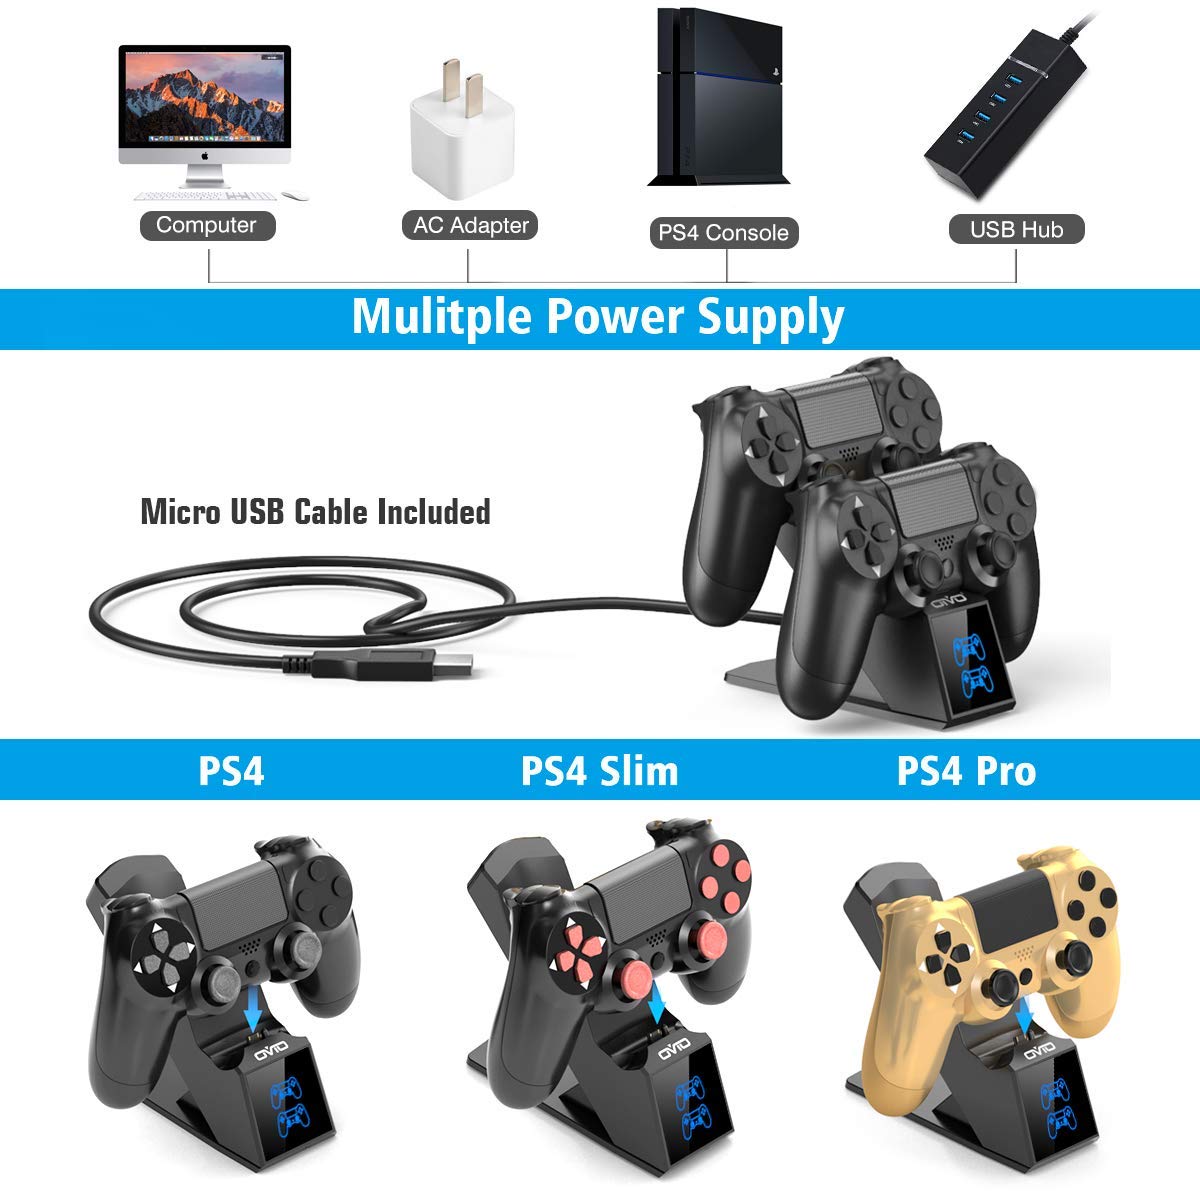 OIVO PS4 Controller Charger, 1.8H Fast PS4 Charging Dock for Sony Playstation 4 Controllers, Playstation 4 Controller Charger for Playstation4 / PS4 / PS4 Slim / PS4 Pro Controller